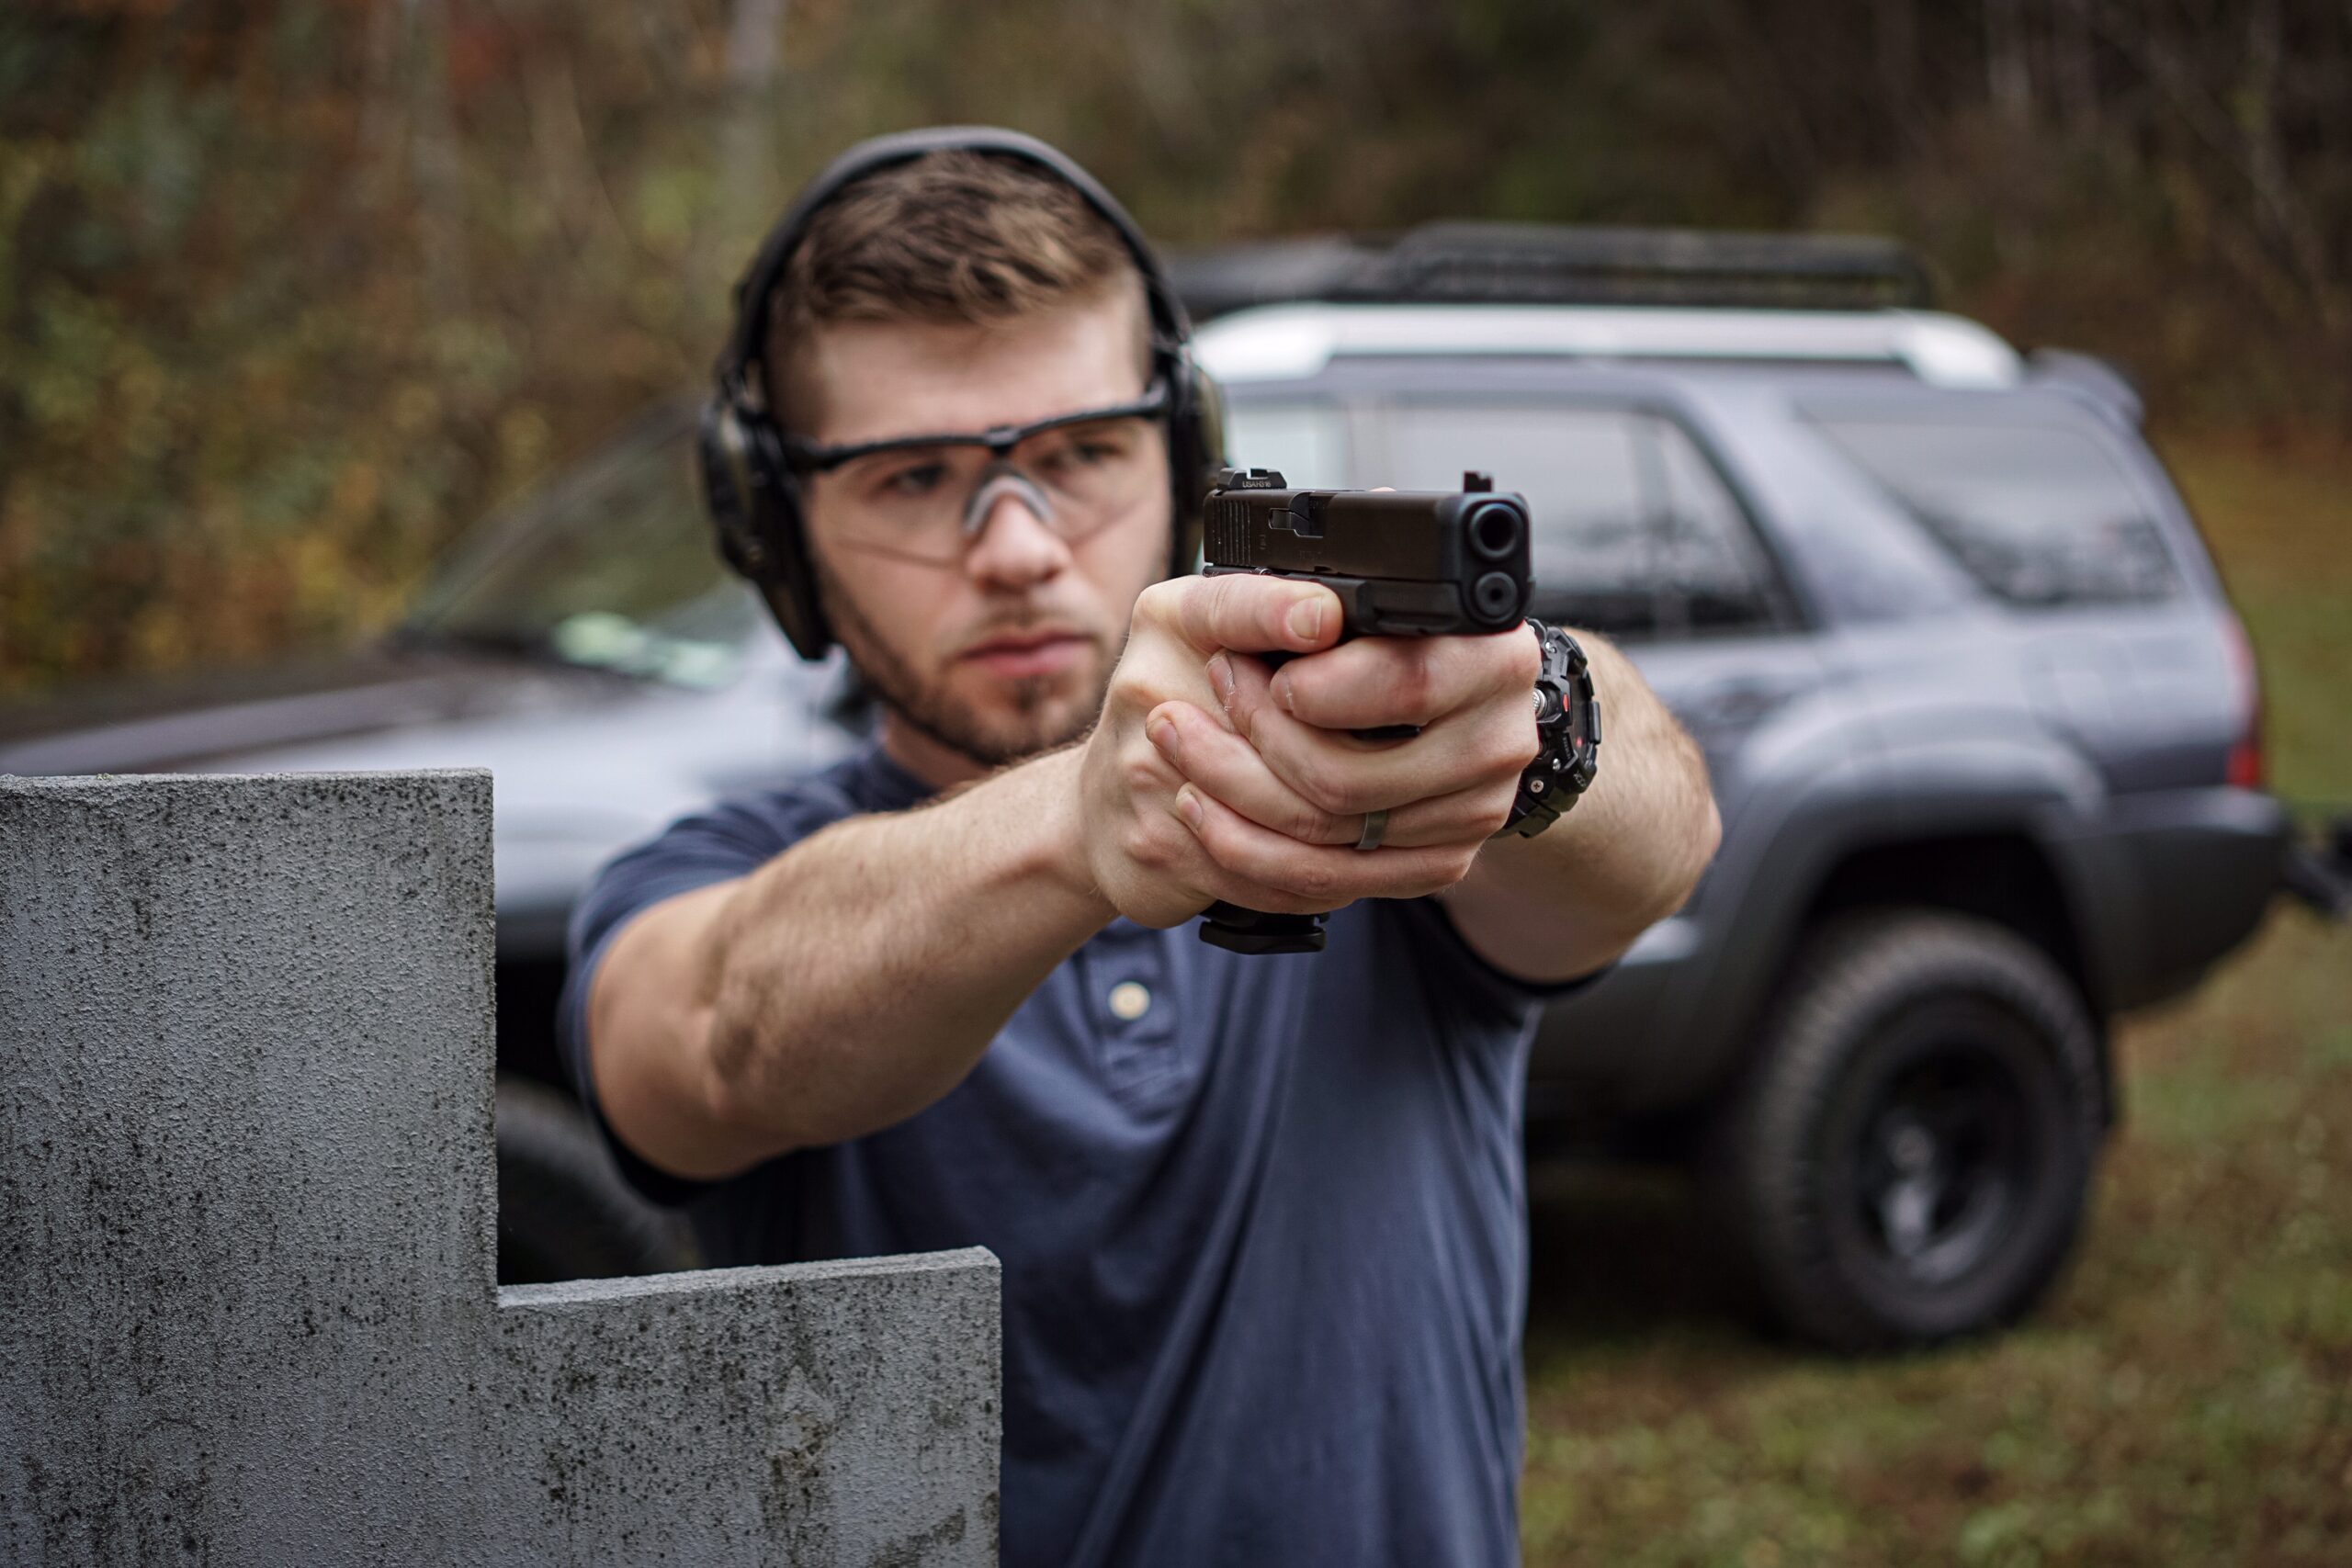 Glock 17 Gen 5 Review: Is It Worth the Upgrade? - USA Carry